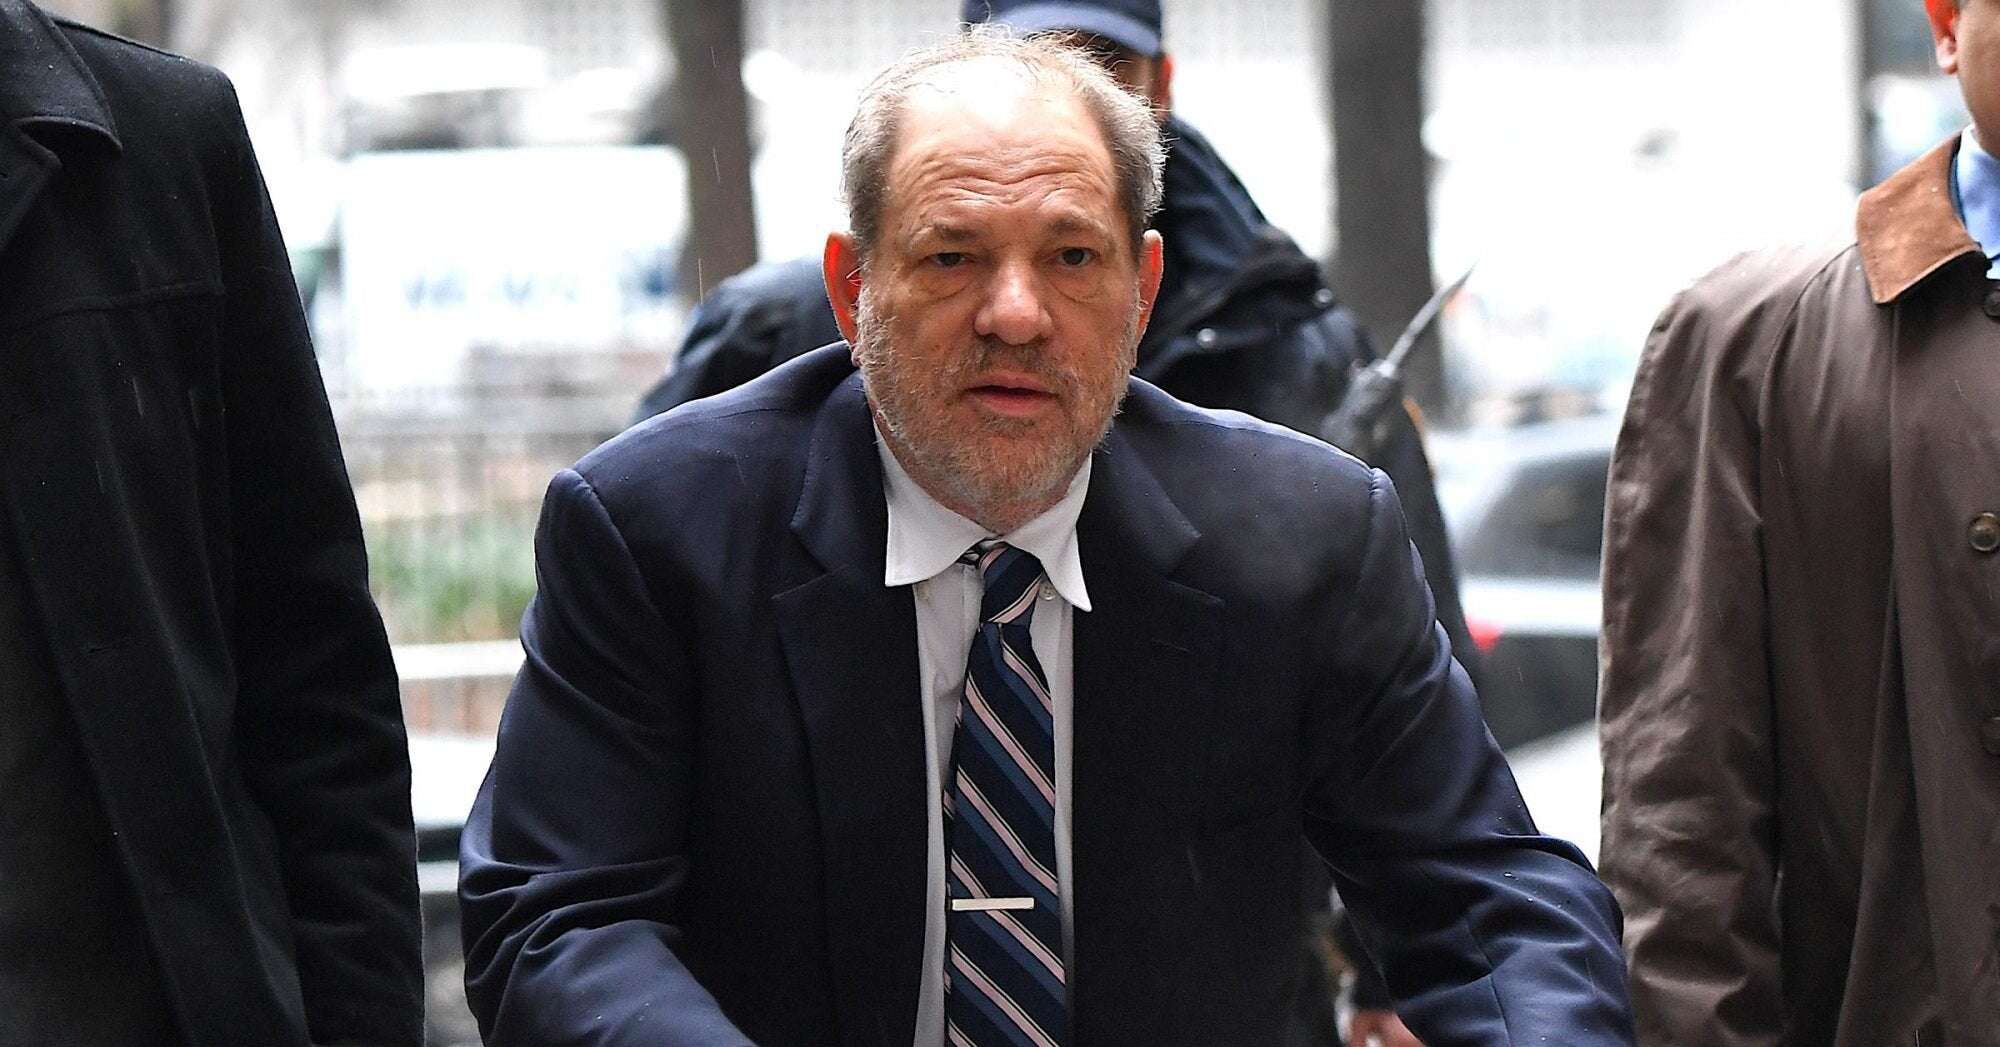 image for Harvey Weinstein tests positive for coronavirus while in jail: Report